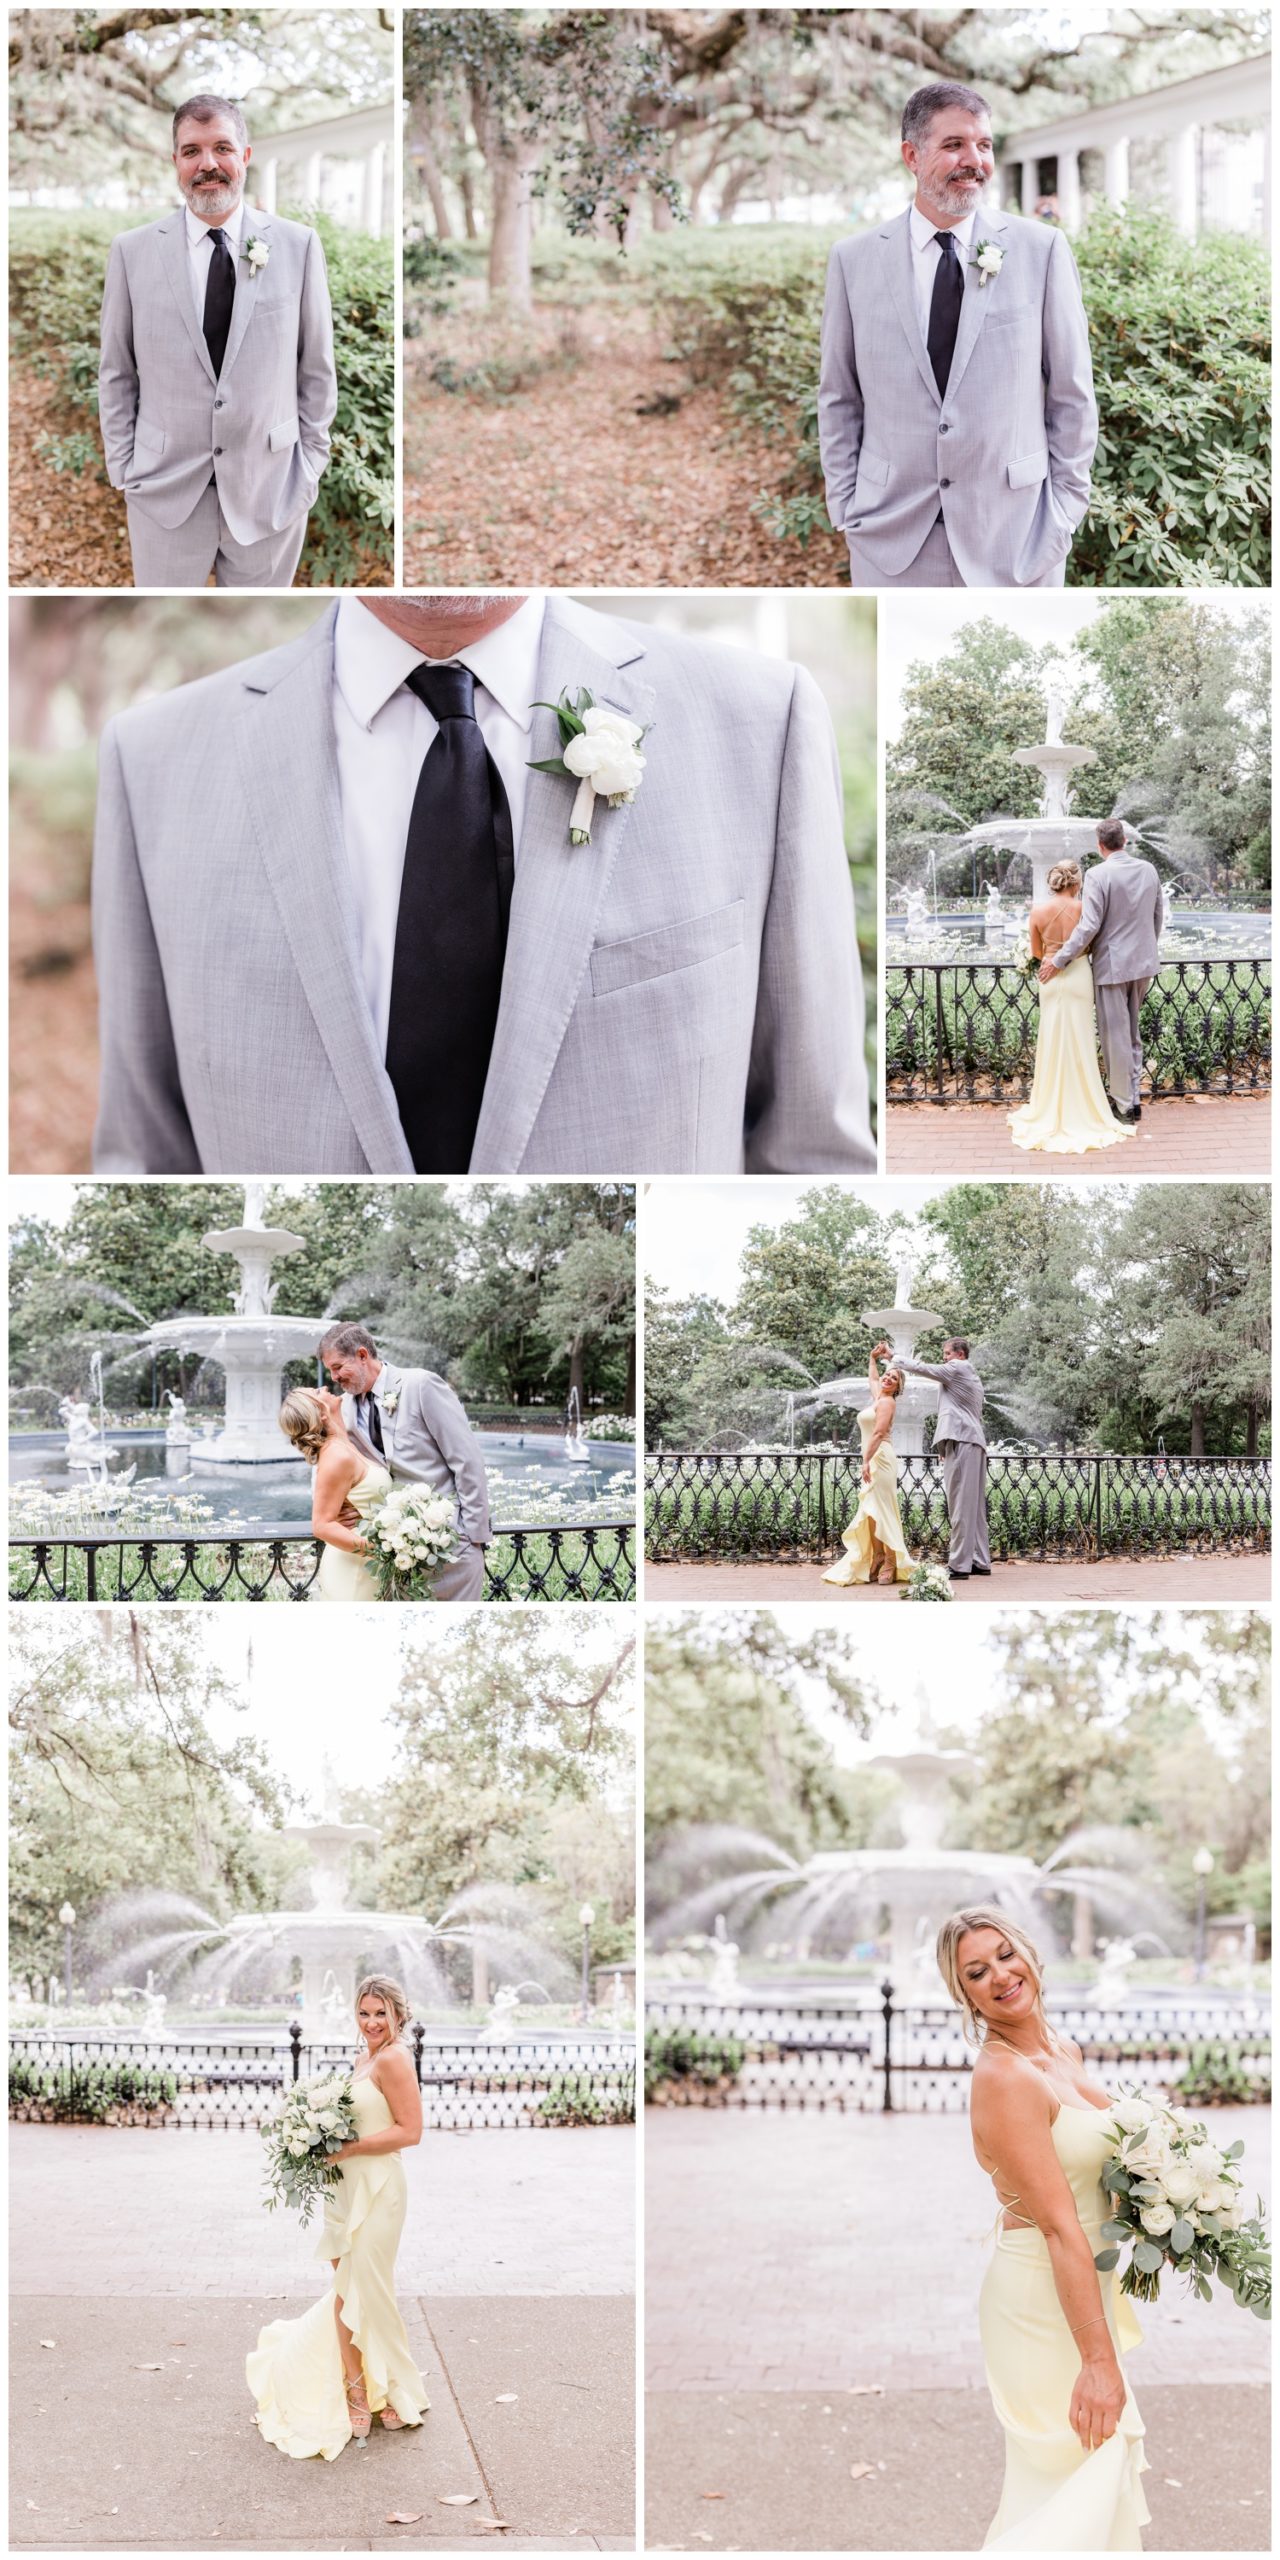 A Whimsical Forsyth Park Elopement - apt b photography - the savannah elopement package